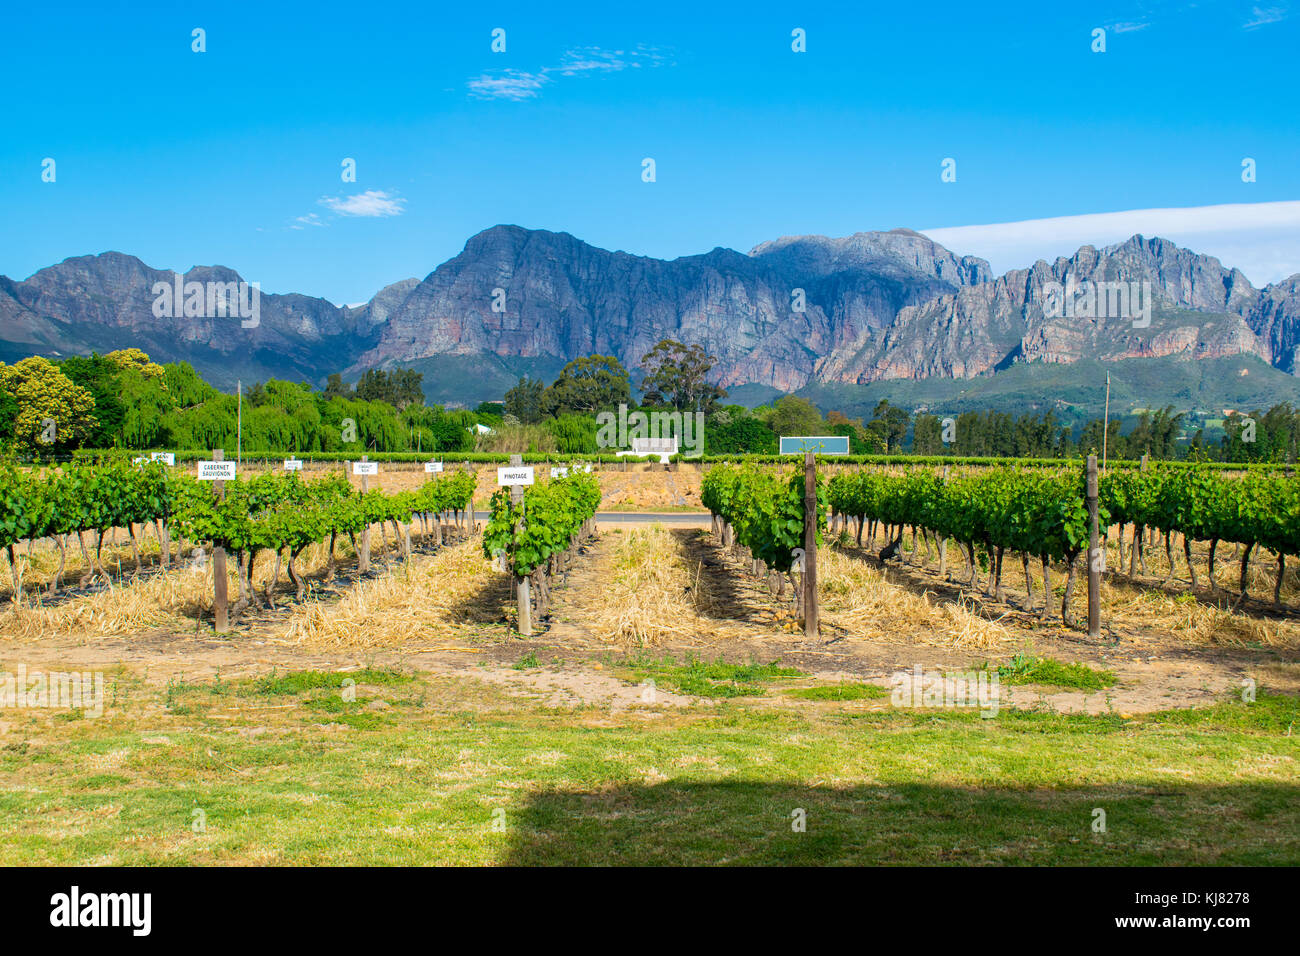 Travel through the beautiful mountains and winelands of Western Cape, South Africa Stock Photo